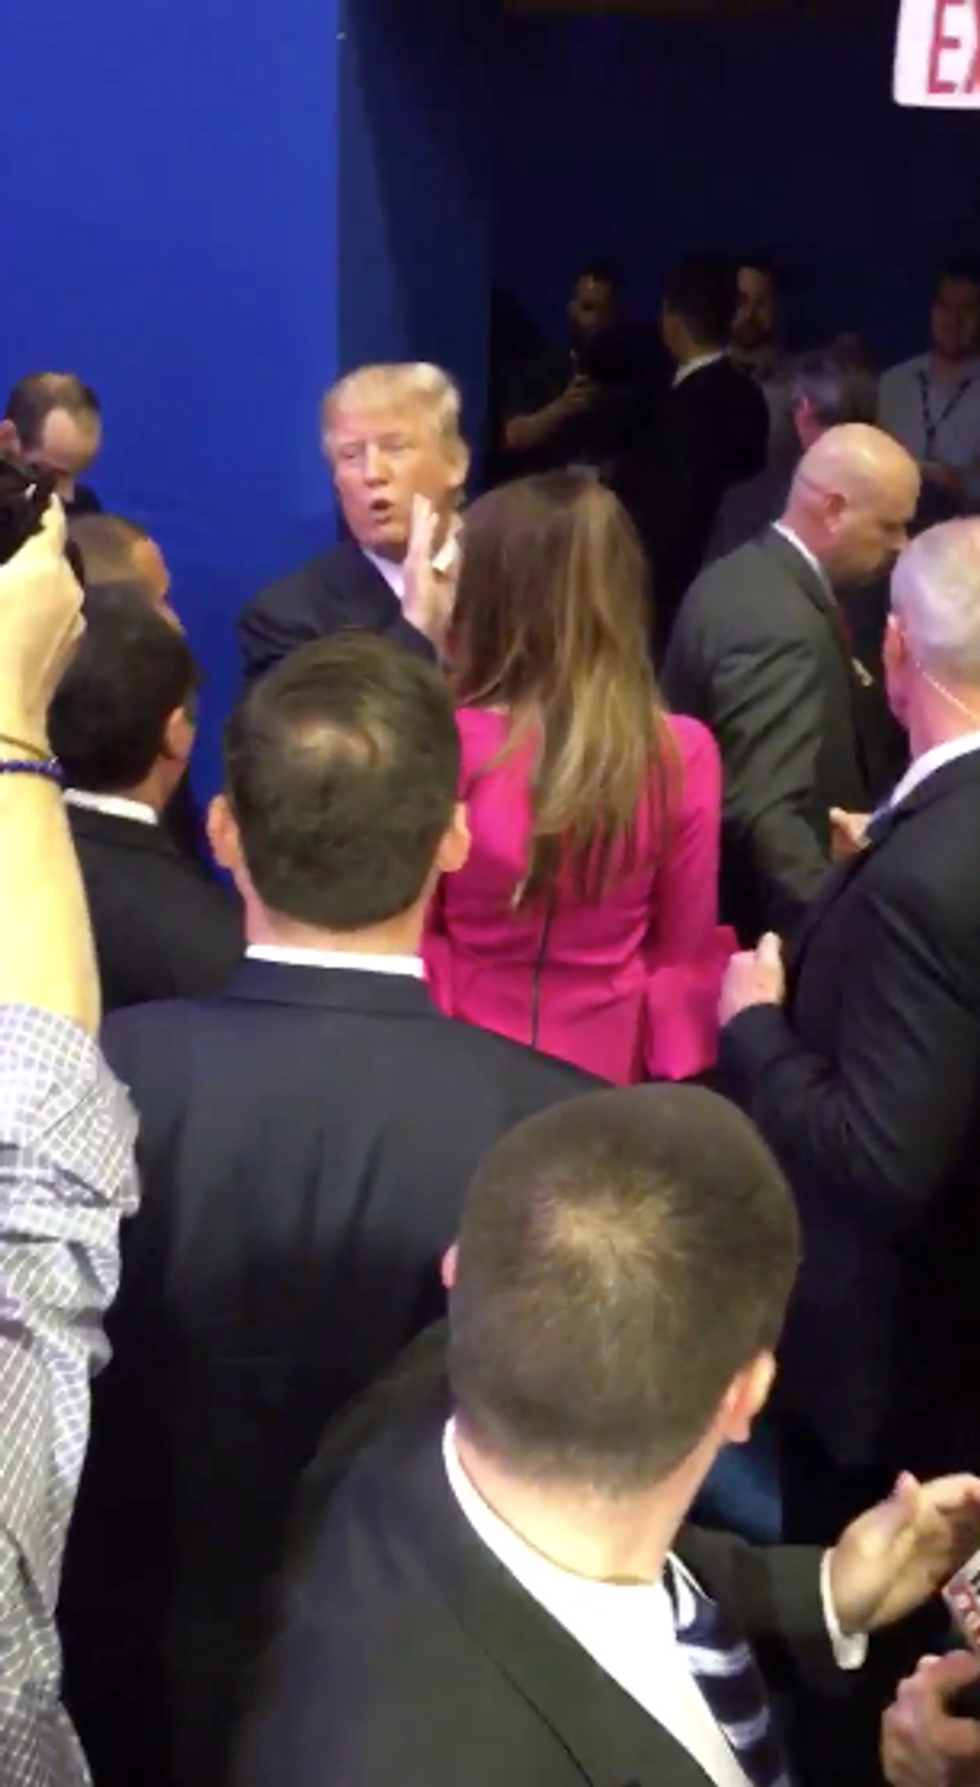 Where's the Tie Made?': Watch Jeb Bush's Former Communications Director Confront Trump